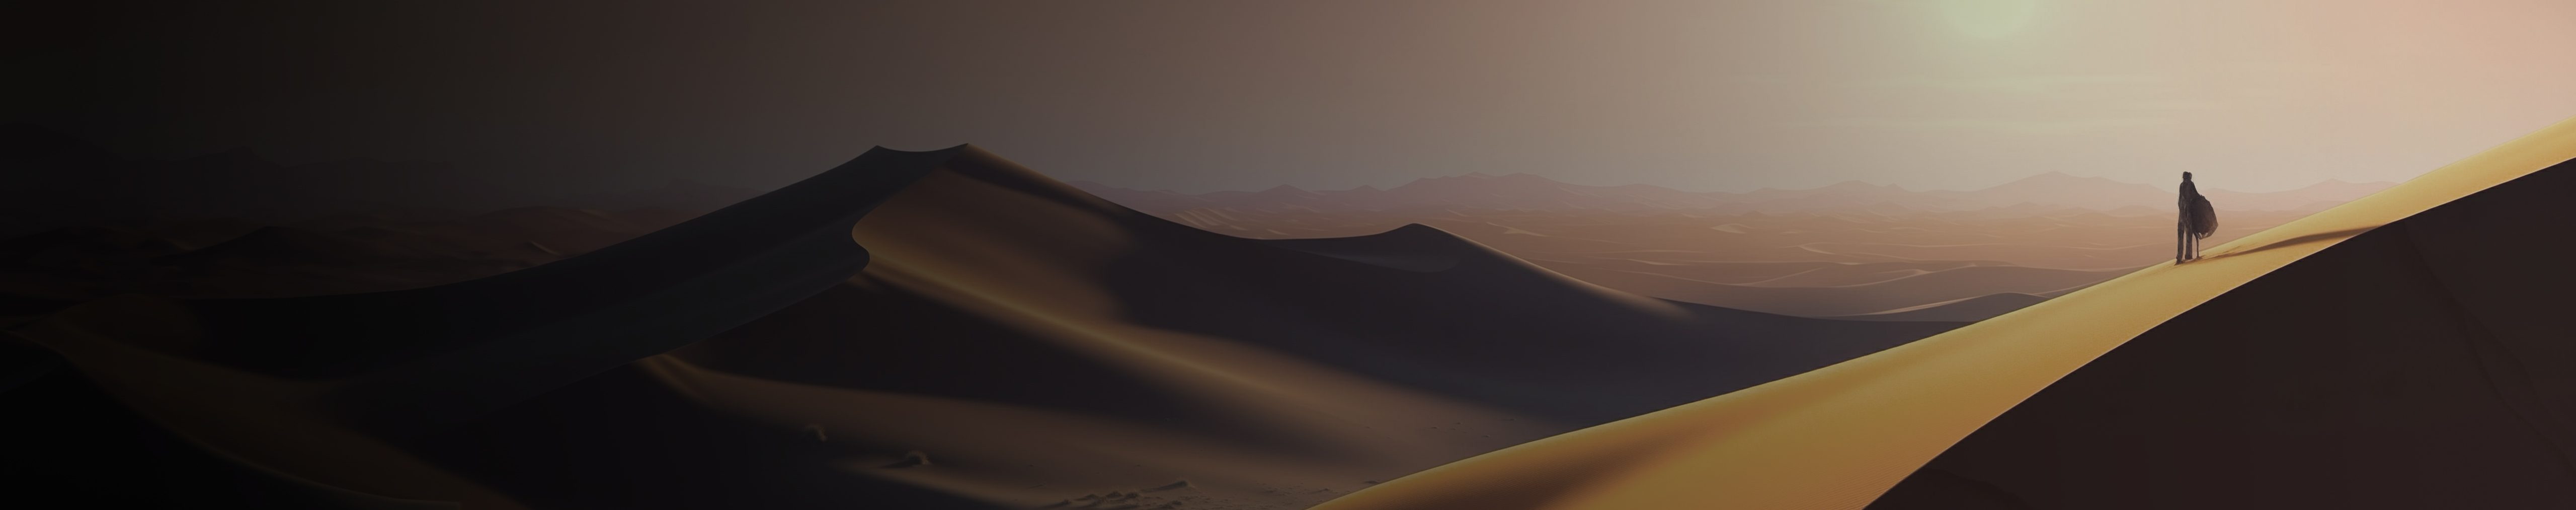 Inspired by: Dune